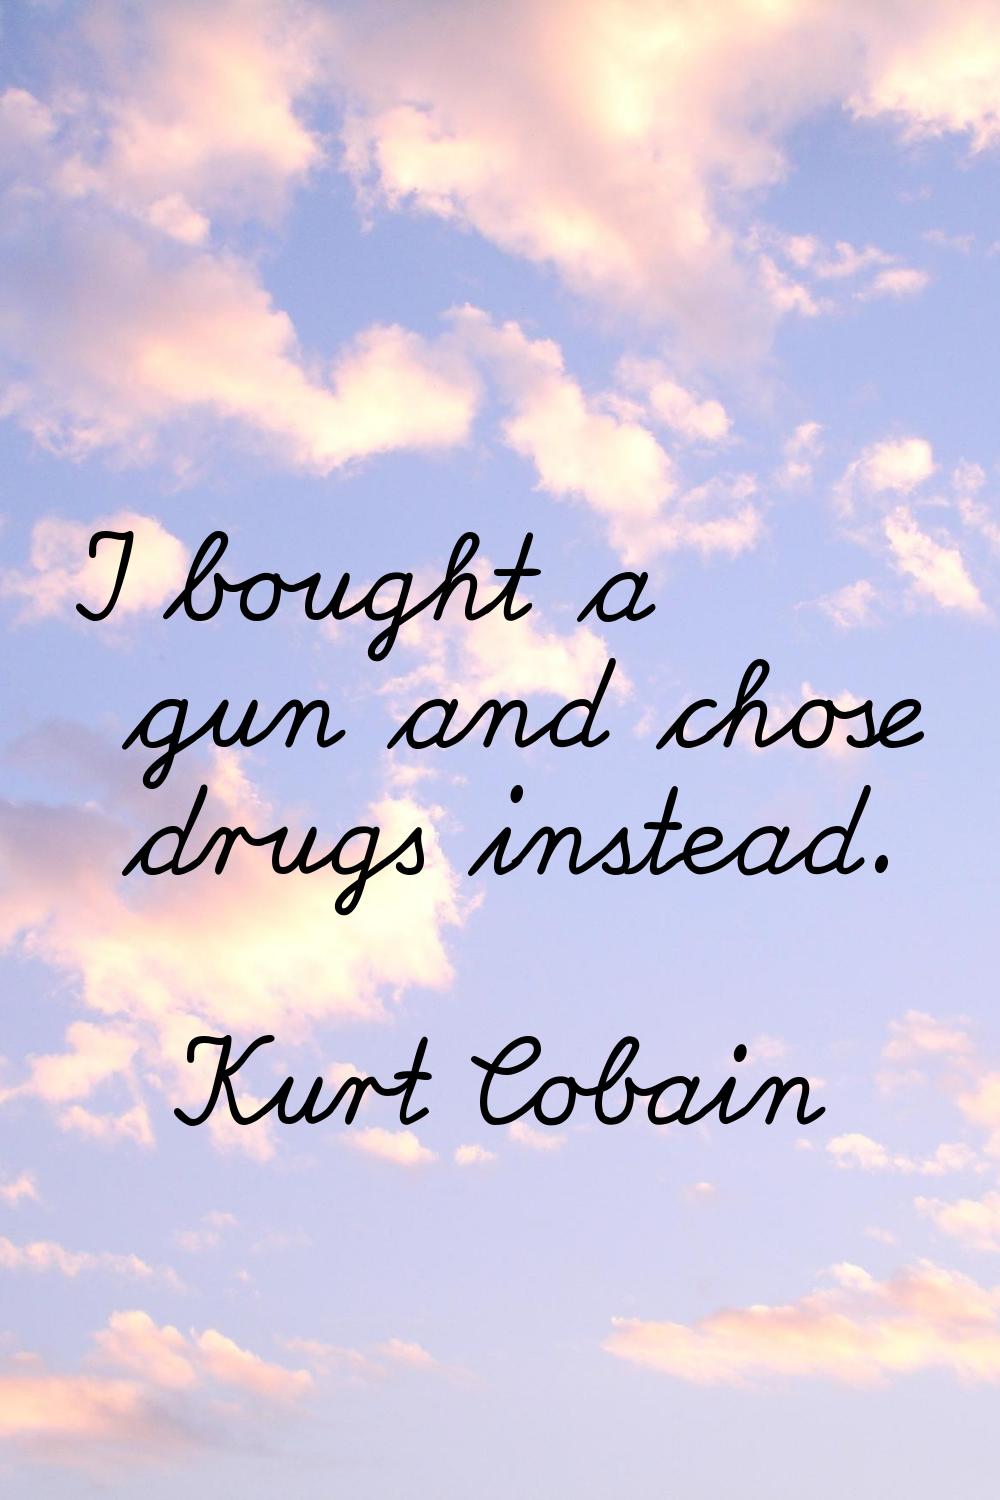 I bought a gun and chose drugs instead.